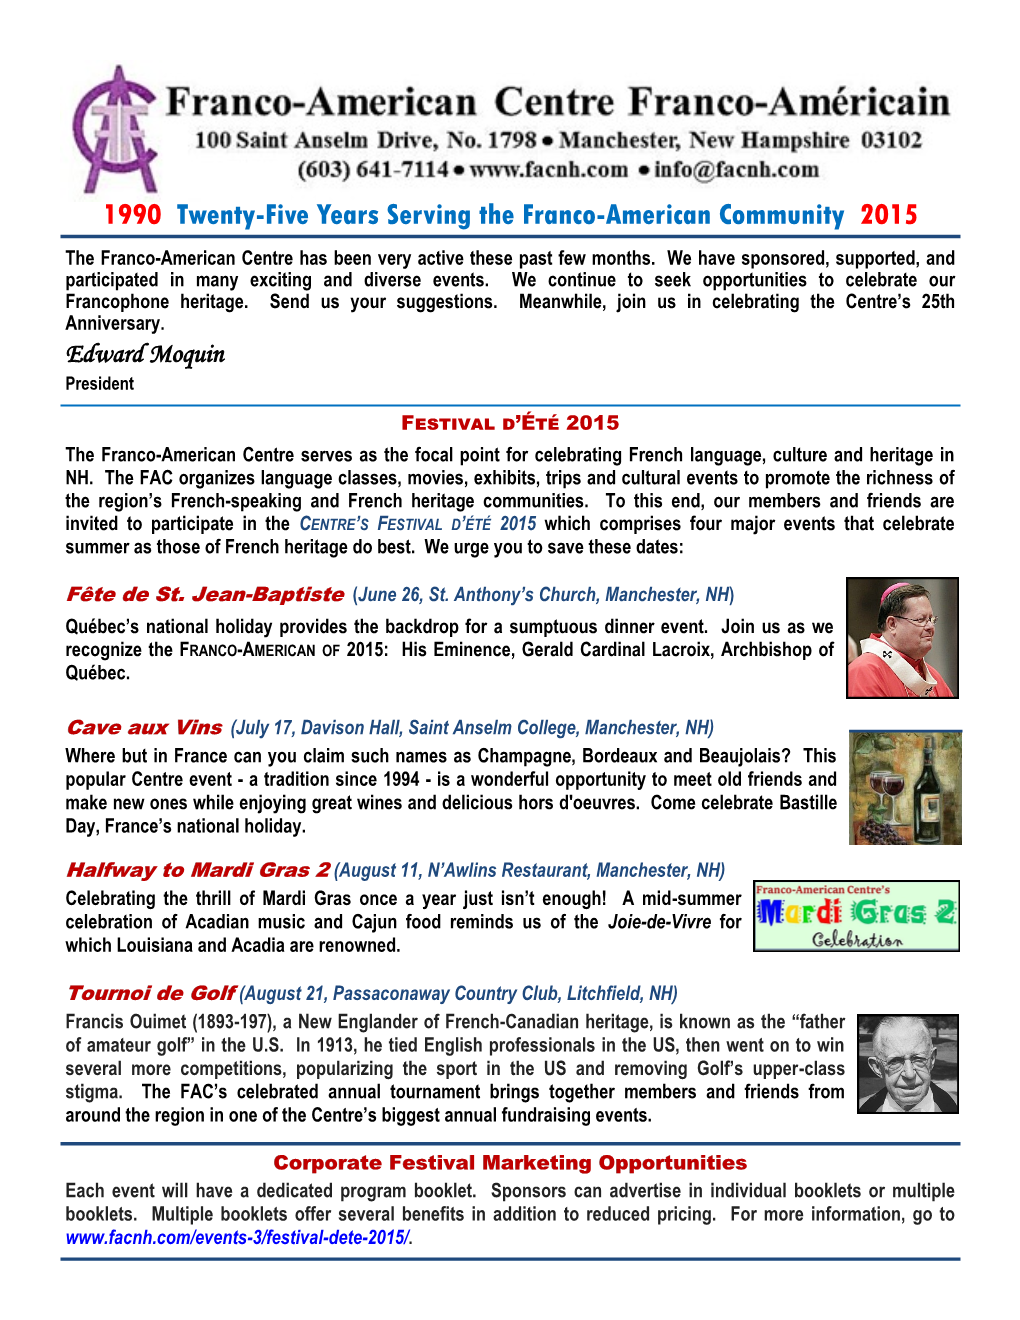 1990 Twenty-Five Years Serving the Franco-American Community 2015 the Franco-American Centre Has Been Very Active These Past Few Months